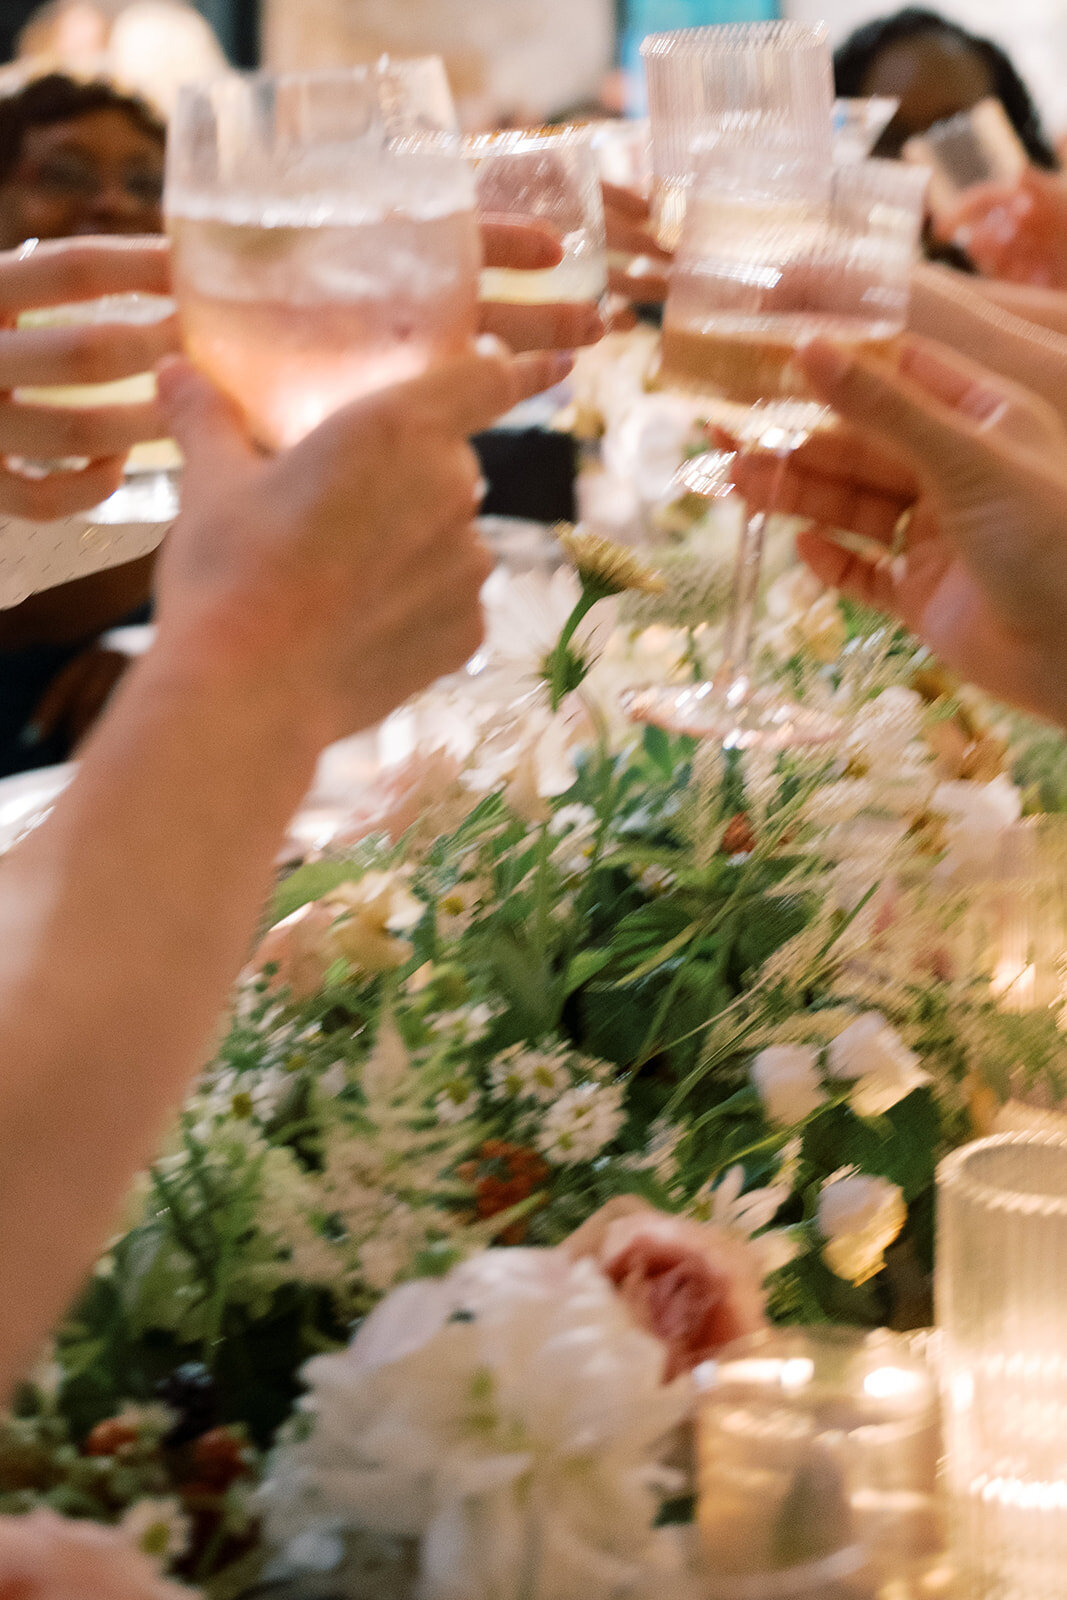 Guests giving cheers at reception over floral centerpieces.